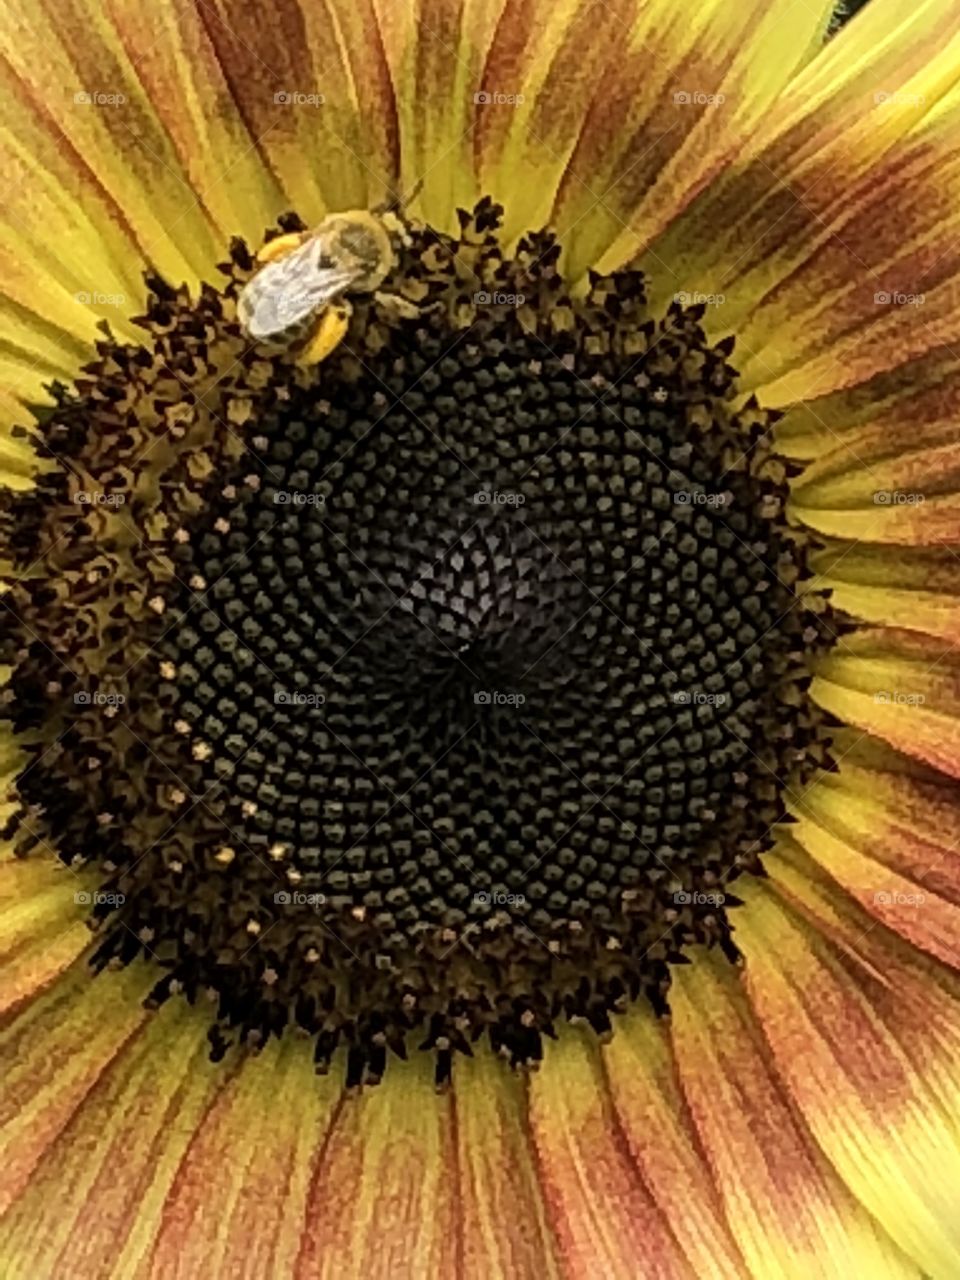 Pollen collecting bee, on big sunflower!